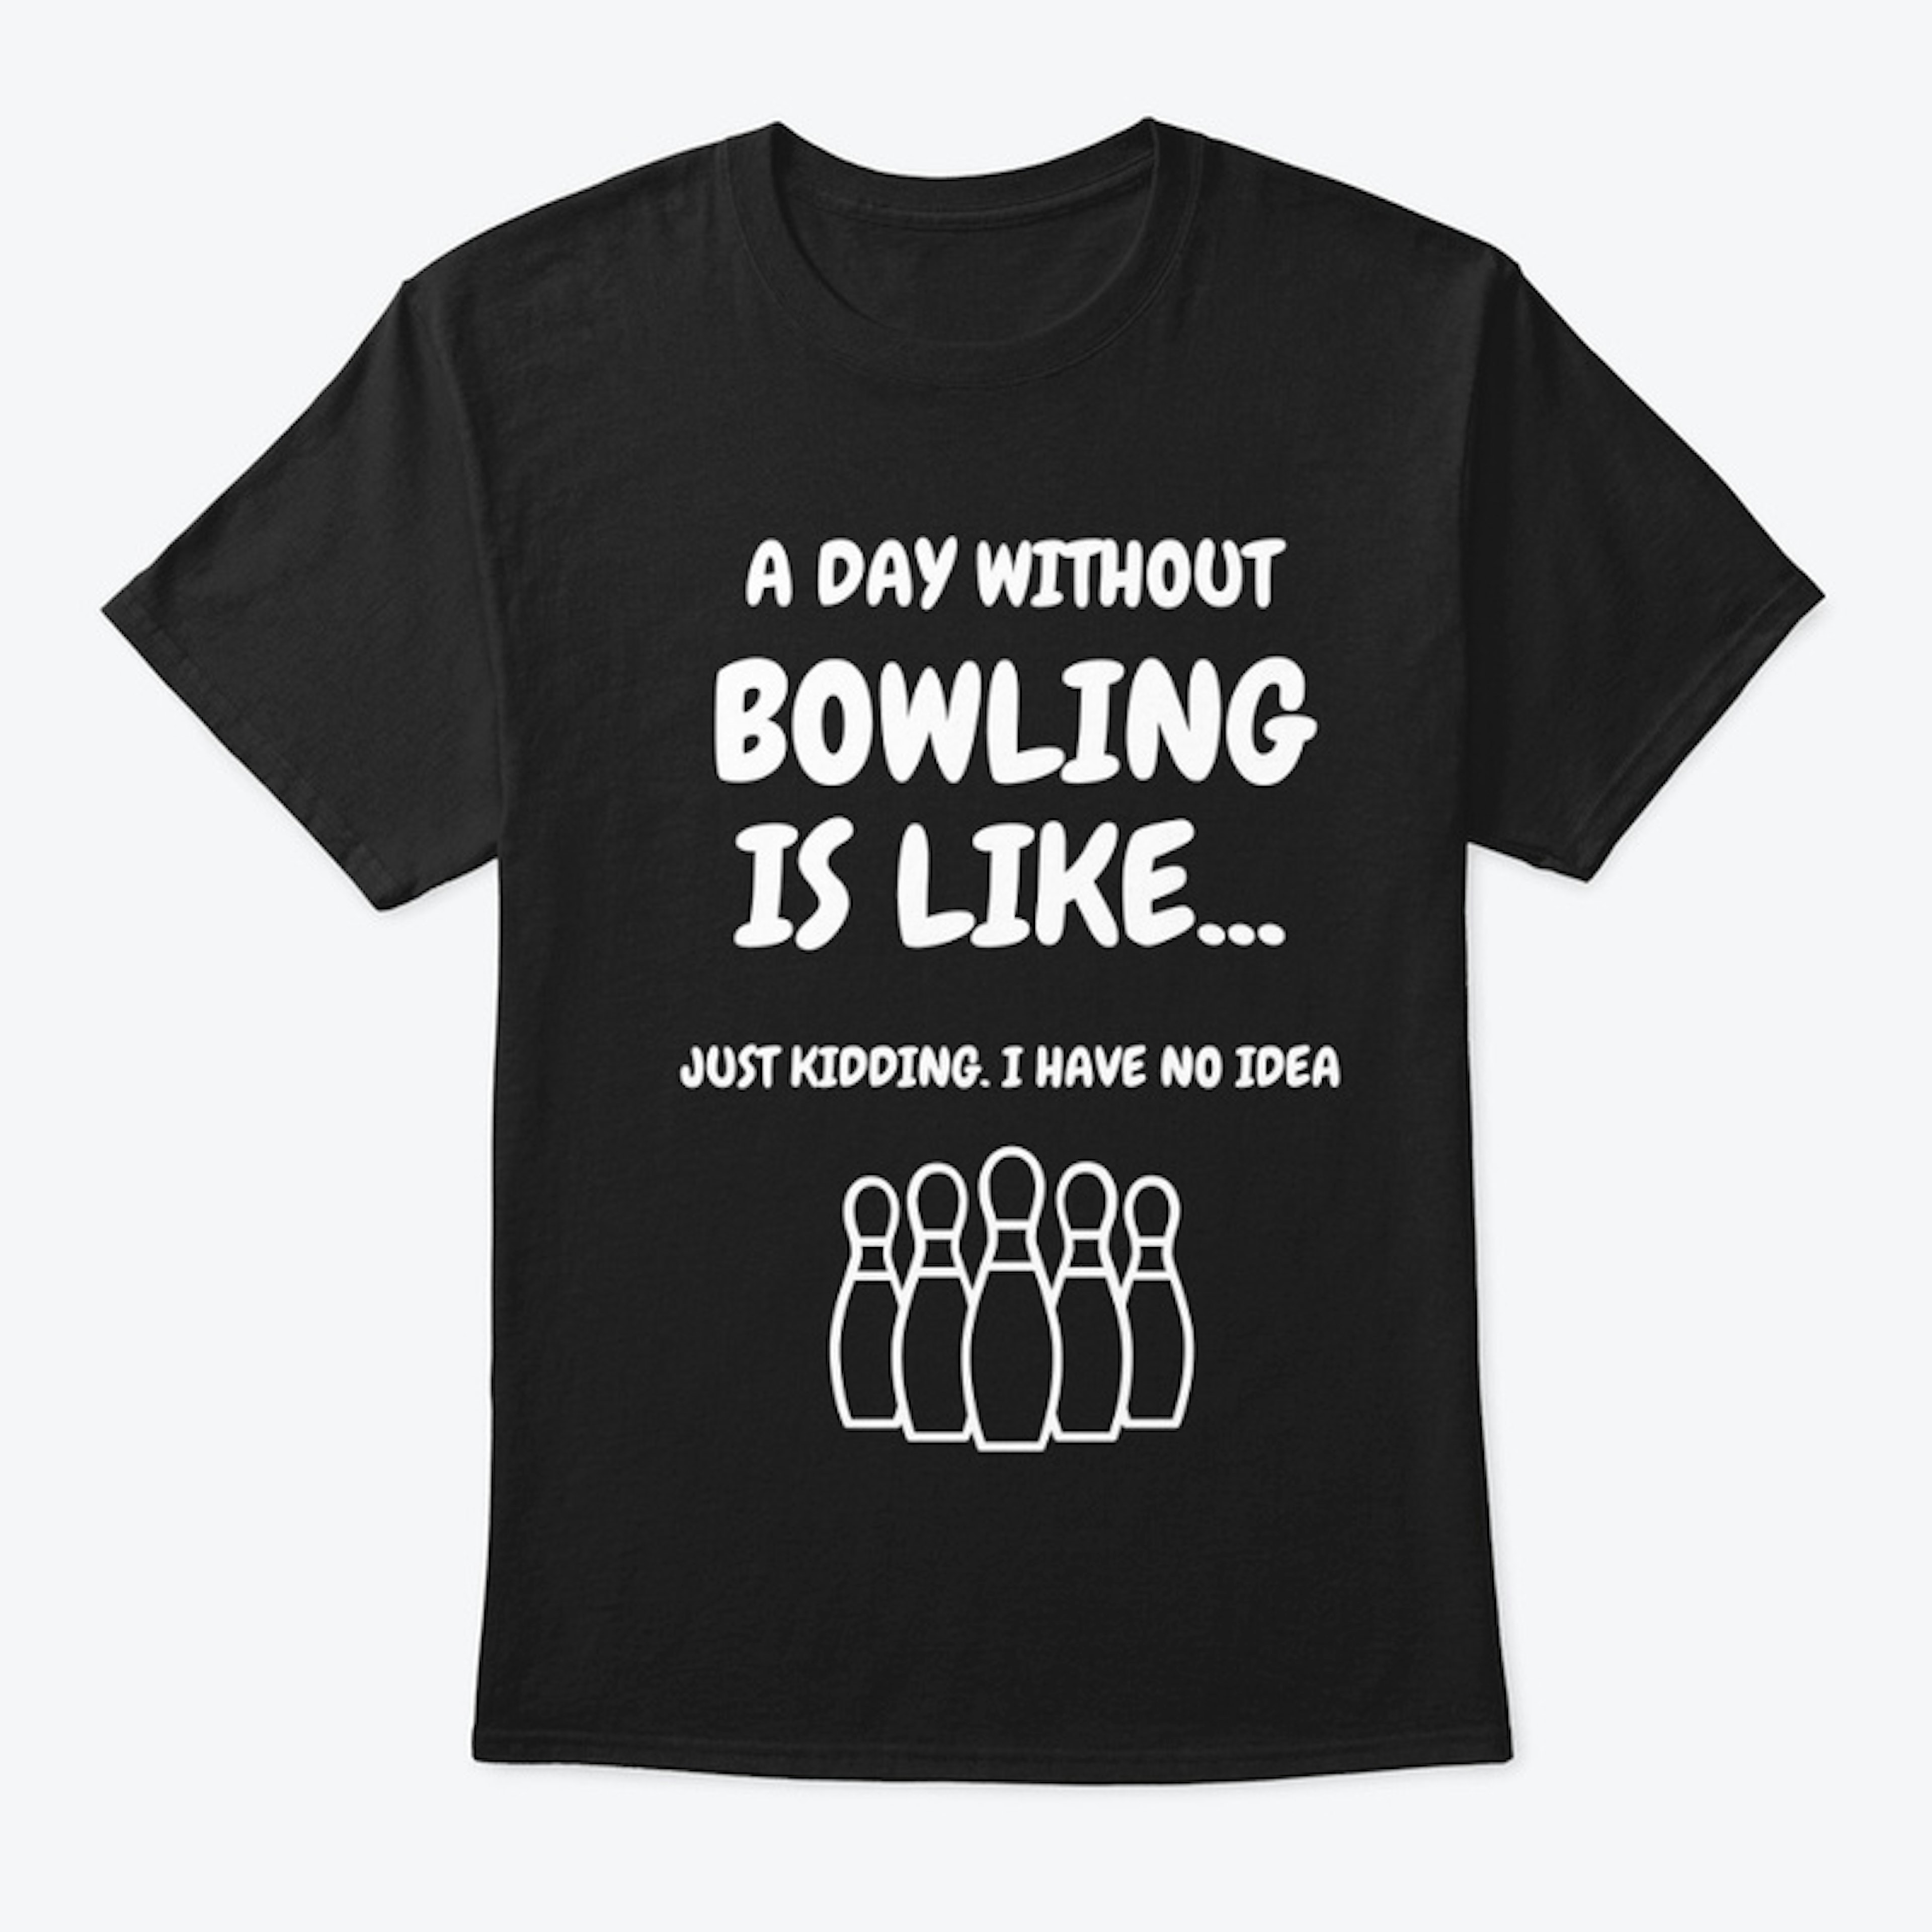 A day without bowling is like...